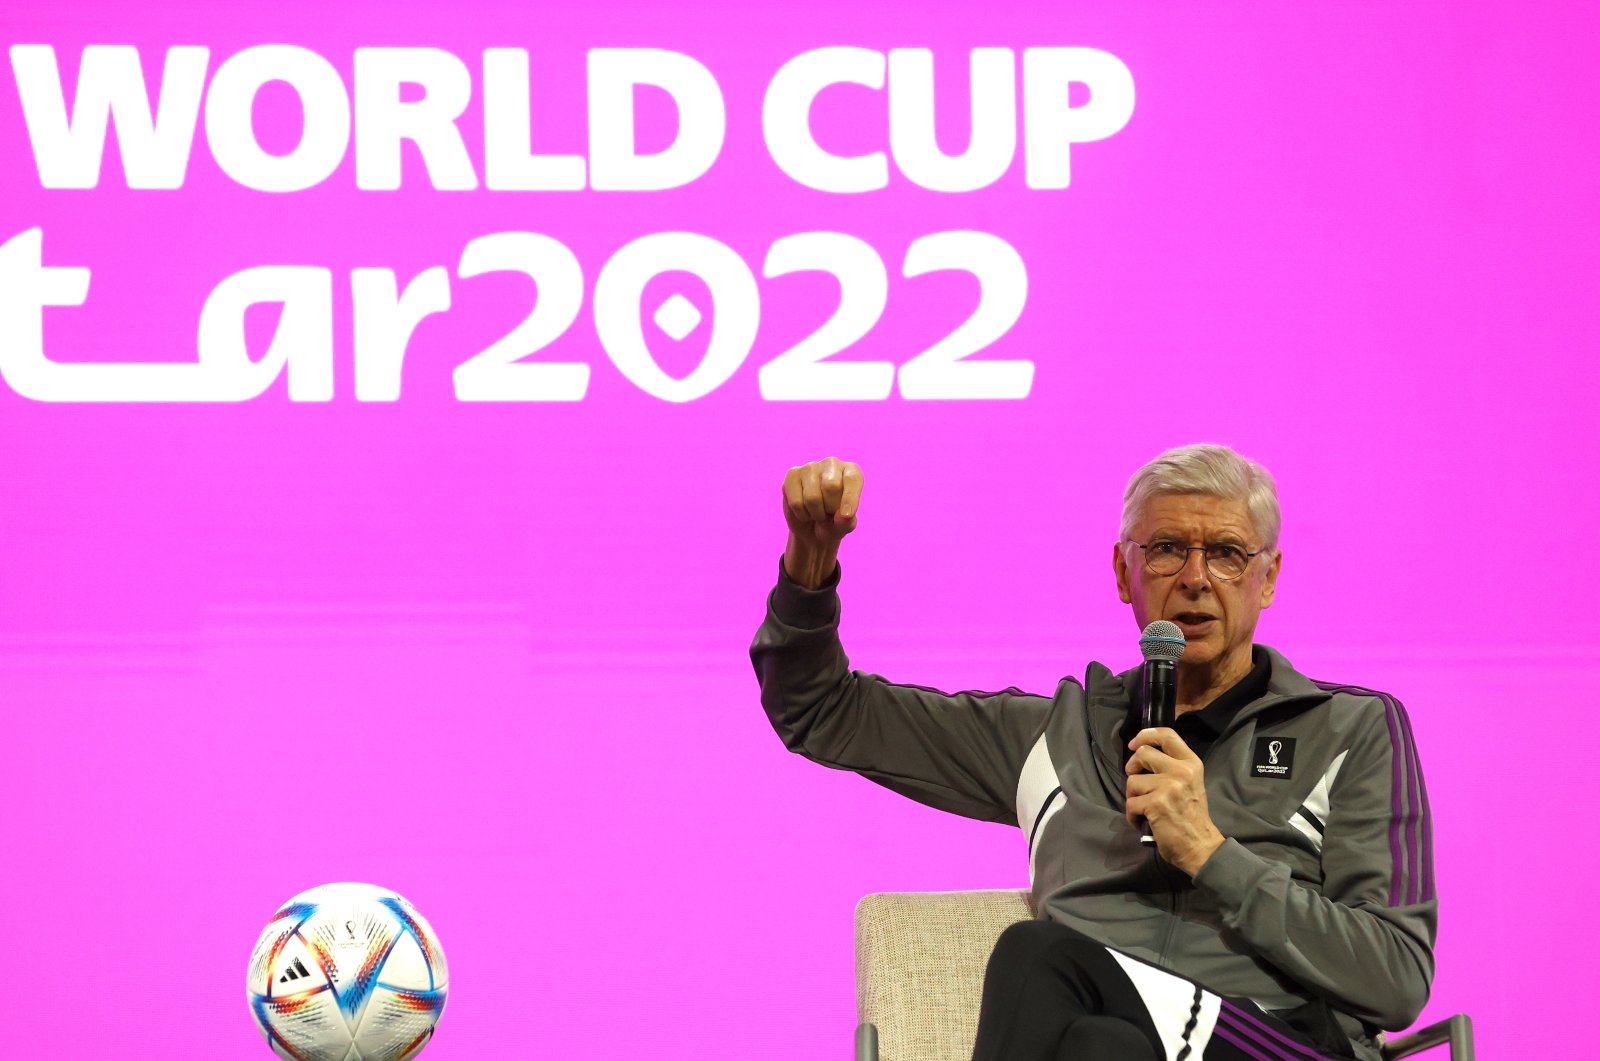 FIFA Director of Global Football Development and the Technical Study Group (TSG), Arsene Wenger, speaks to the media during a media briefing analysis after the group stage of the FIFA World Cup 2022, Doha, Qatar, Dec. 4, 2022. (EPA Photo)